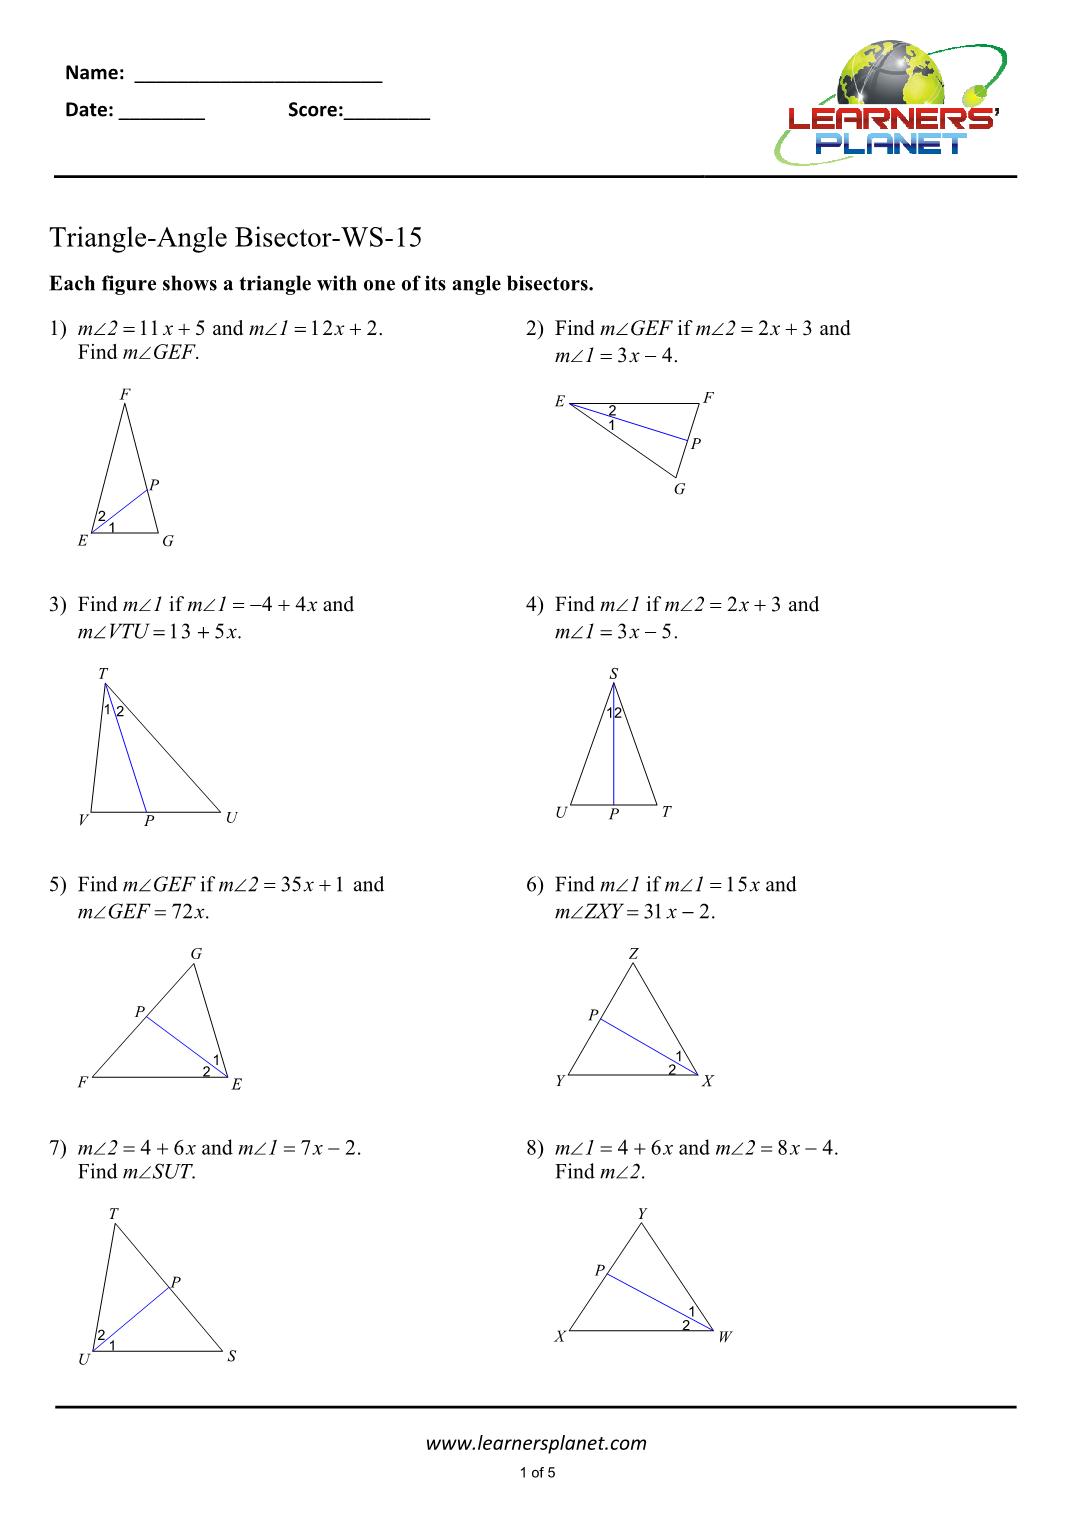 Copying And Bisecting Angles Worksheet  FuelHandler With Angle Bisector Theorem Worksheet